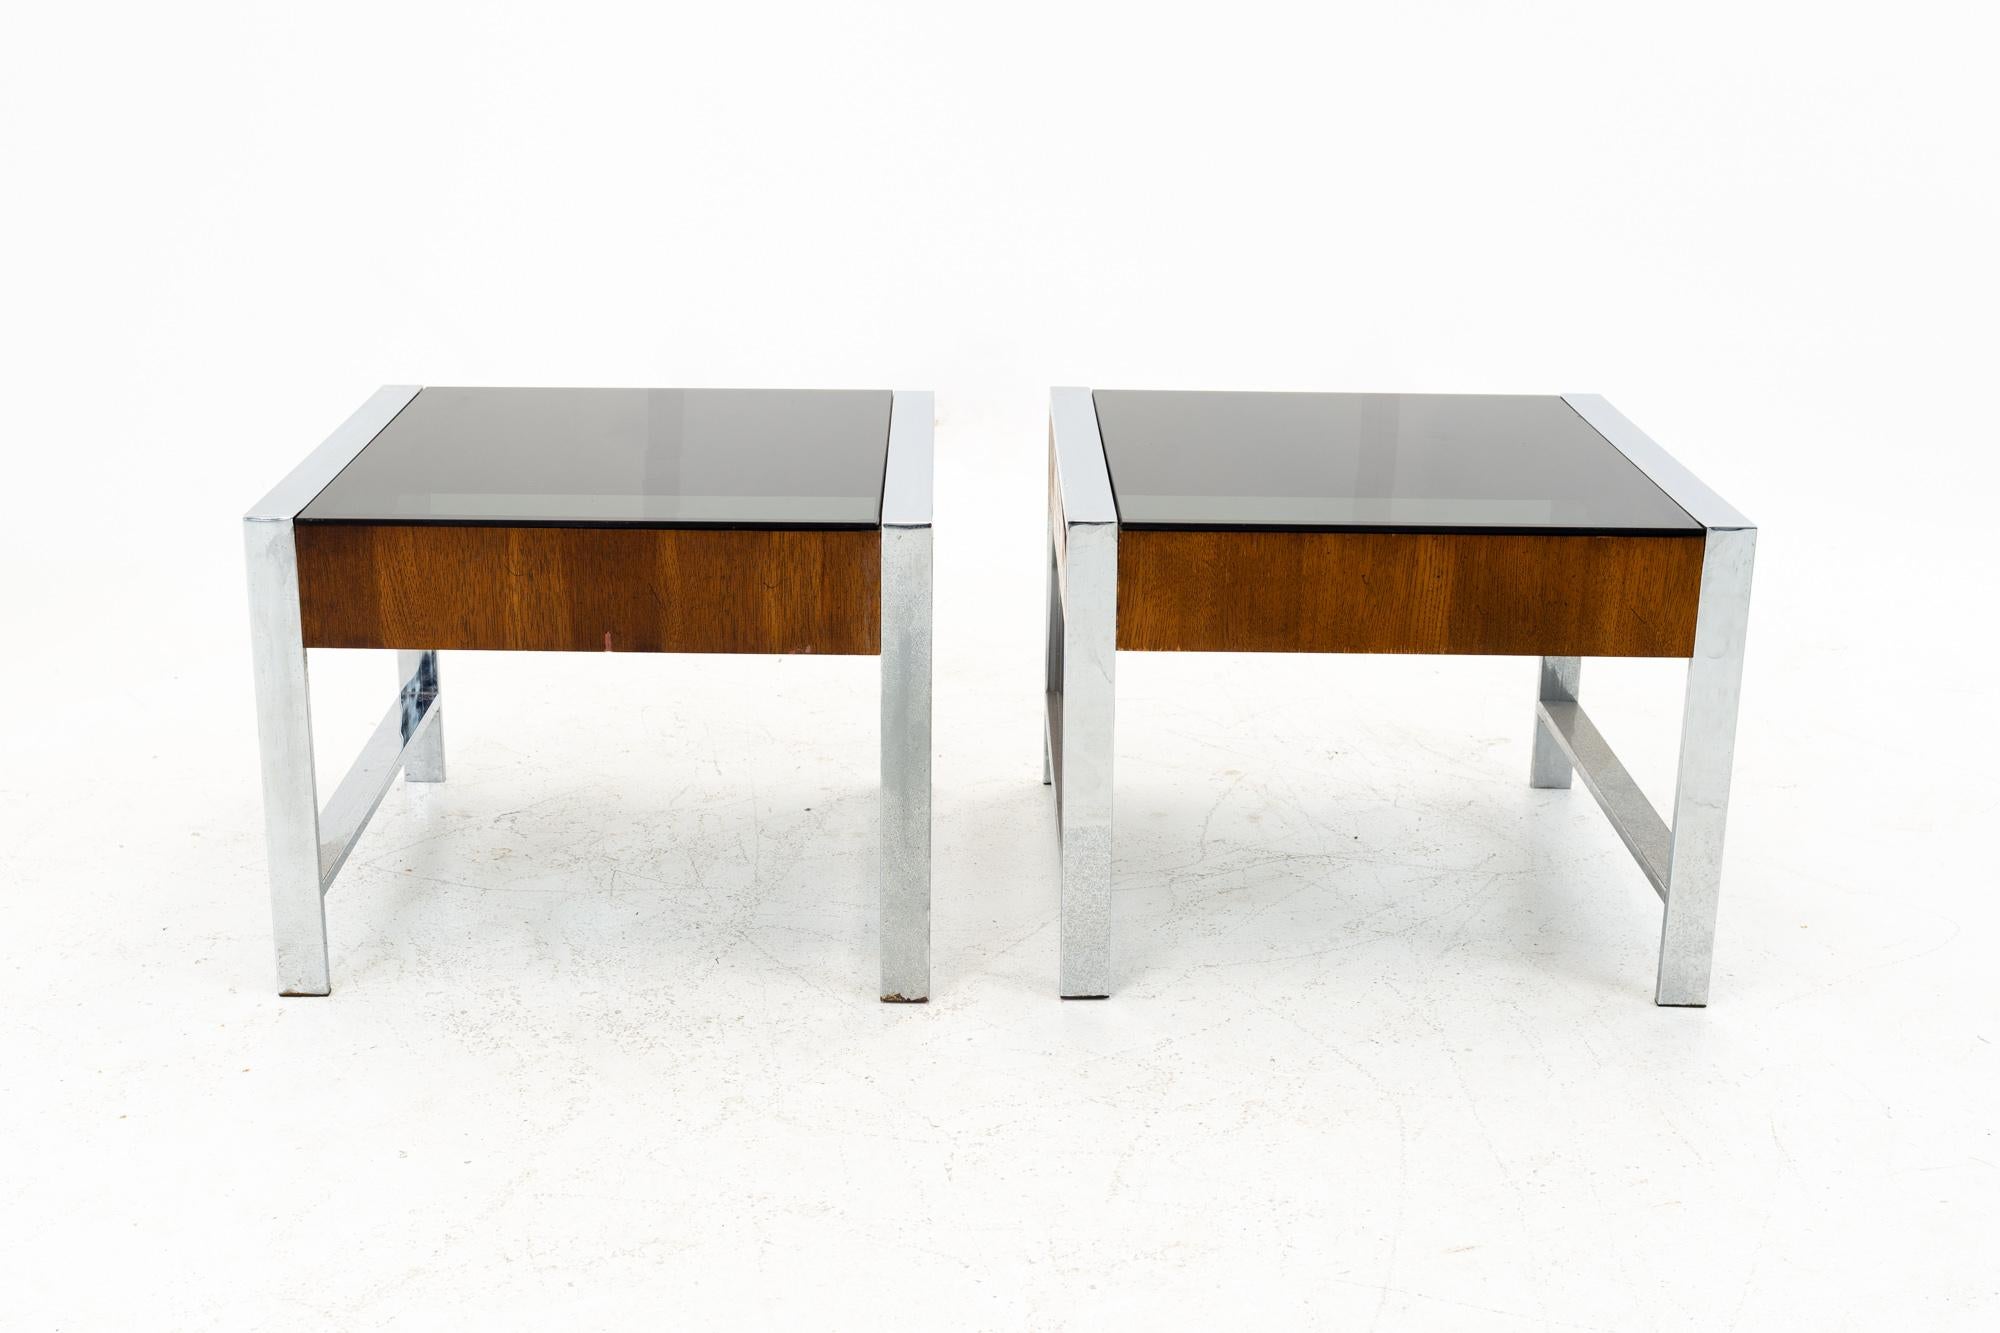 Milo Baughman Style Mid Century Chrome and Smoked Glass Side End Tables - Pair

These tables measure: 20 wide x 20 deep x 15.25 inches high

All pieces of furniture can be had in what we call restored vintage condition. That means the piece is